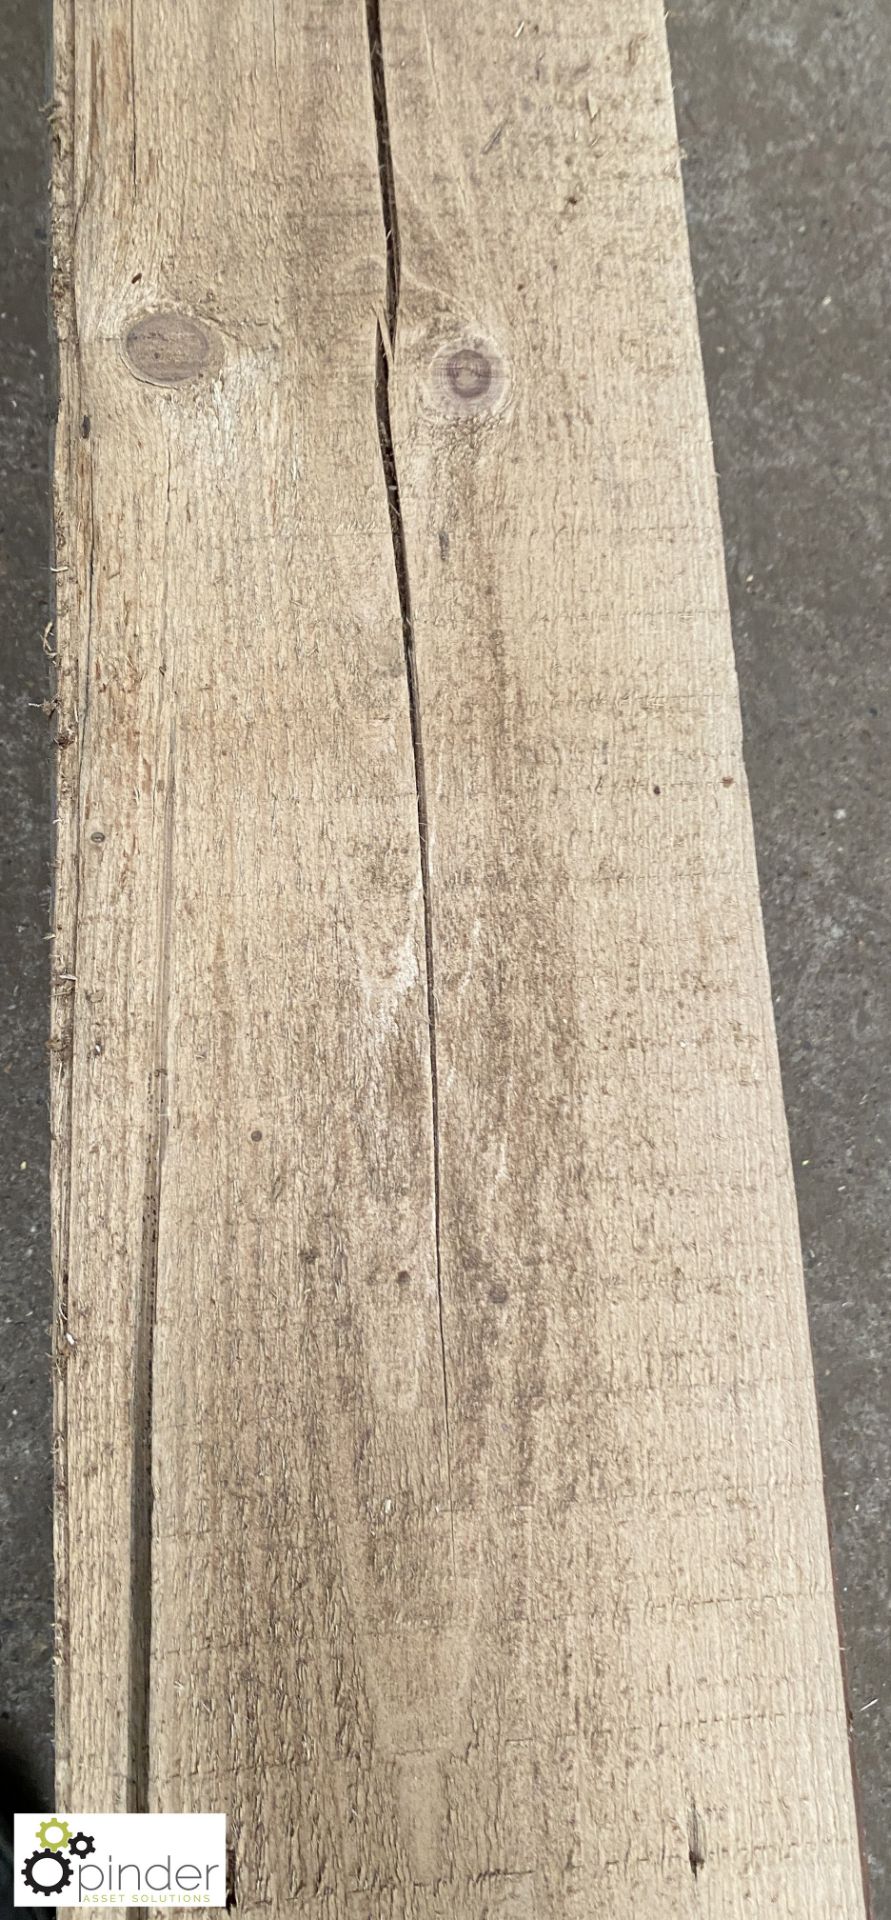 Air dried Pine Beam, 3720mm x 220mm x 200mm - Image 6 of 8